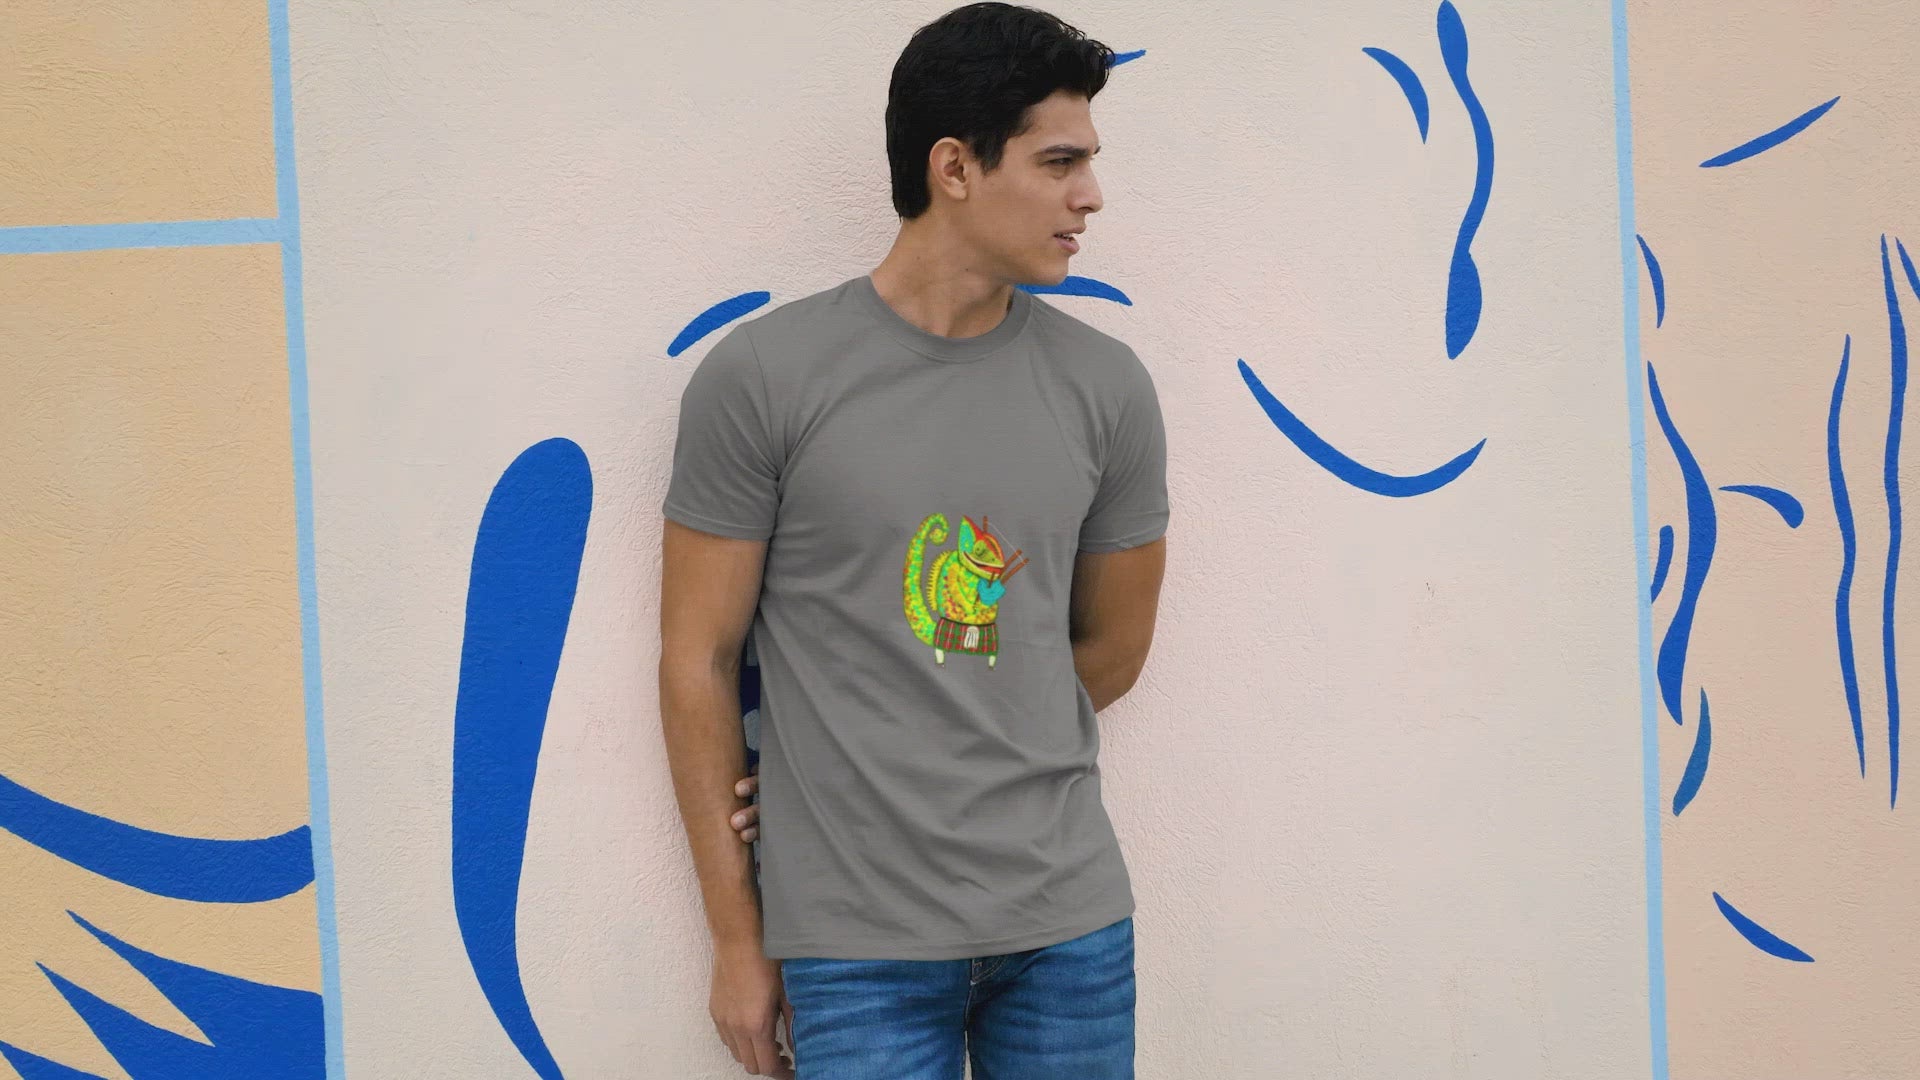 Bagpiper Chameleon | 100% Organic Cotton T Shirt worn by a man in front of a wall